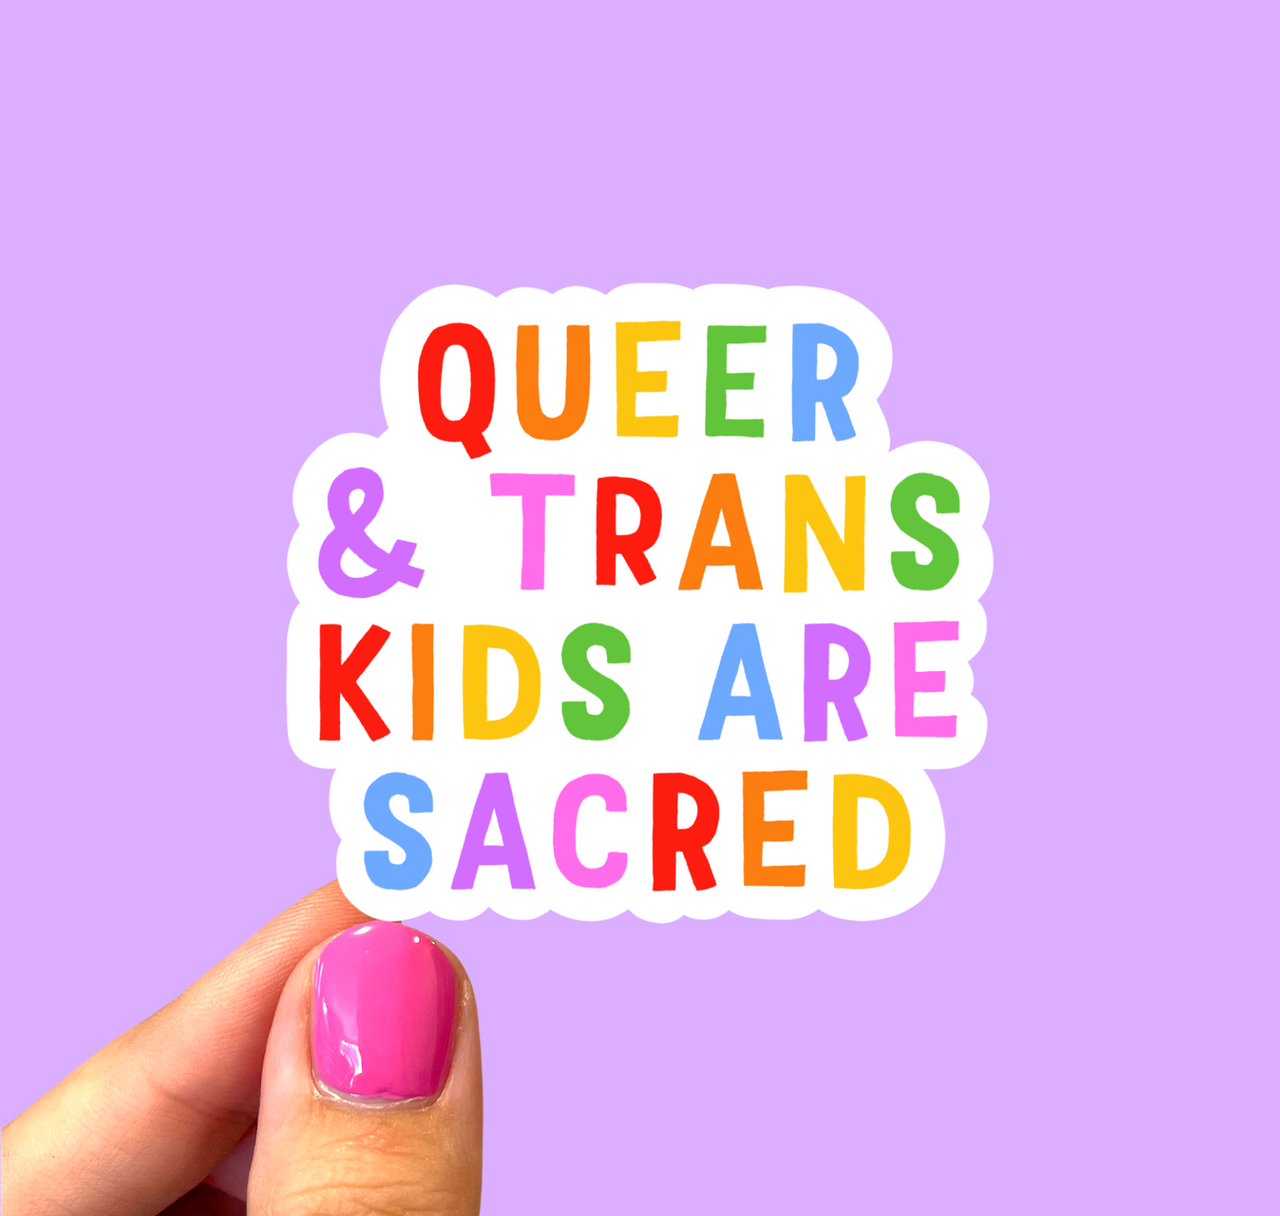 Queer and trans kids are sacred